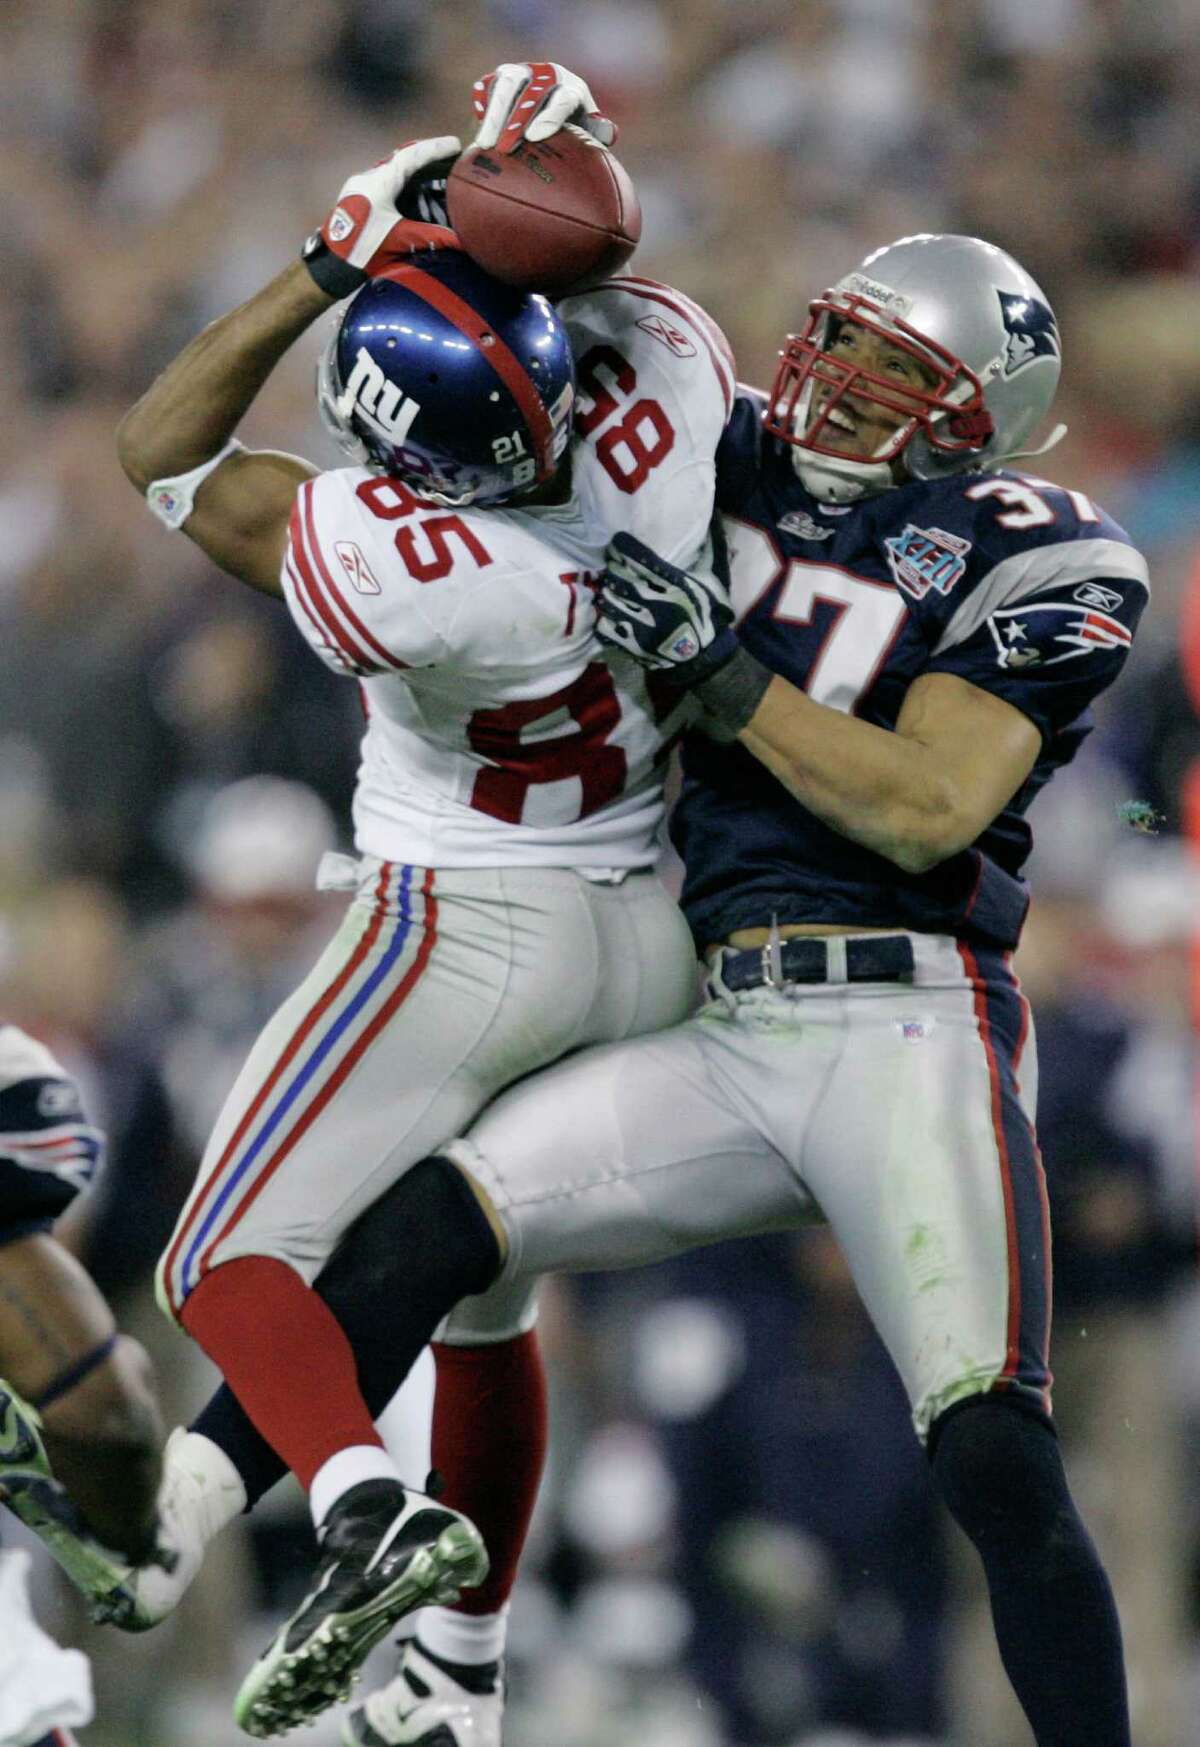 In this Feb. 3, 2008, file photo, the New York Giants receiver David Tyree (85) catches a 32-yard pass in the clutches of New England Patriots safety Rodney Harrison (37) during the fourth quarter of the Super Bowl XLII football game at the University of Phoenix Stadium on Sunday, Feb. 3, 2008 in Glendale, Ariz. The New England Patriots are back in the Super Bowl against the New York Giants, the team that ruined their perfect season in that game four years ago. They advanced with one of Tom Brady's worst games of the season and unheralded Sterling Moore's best. (AP Photo/Gene Puskar)